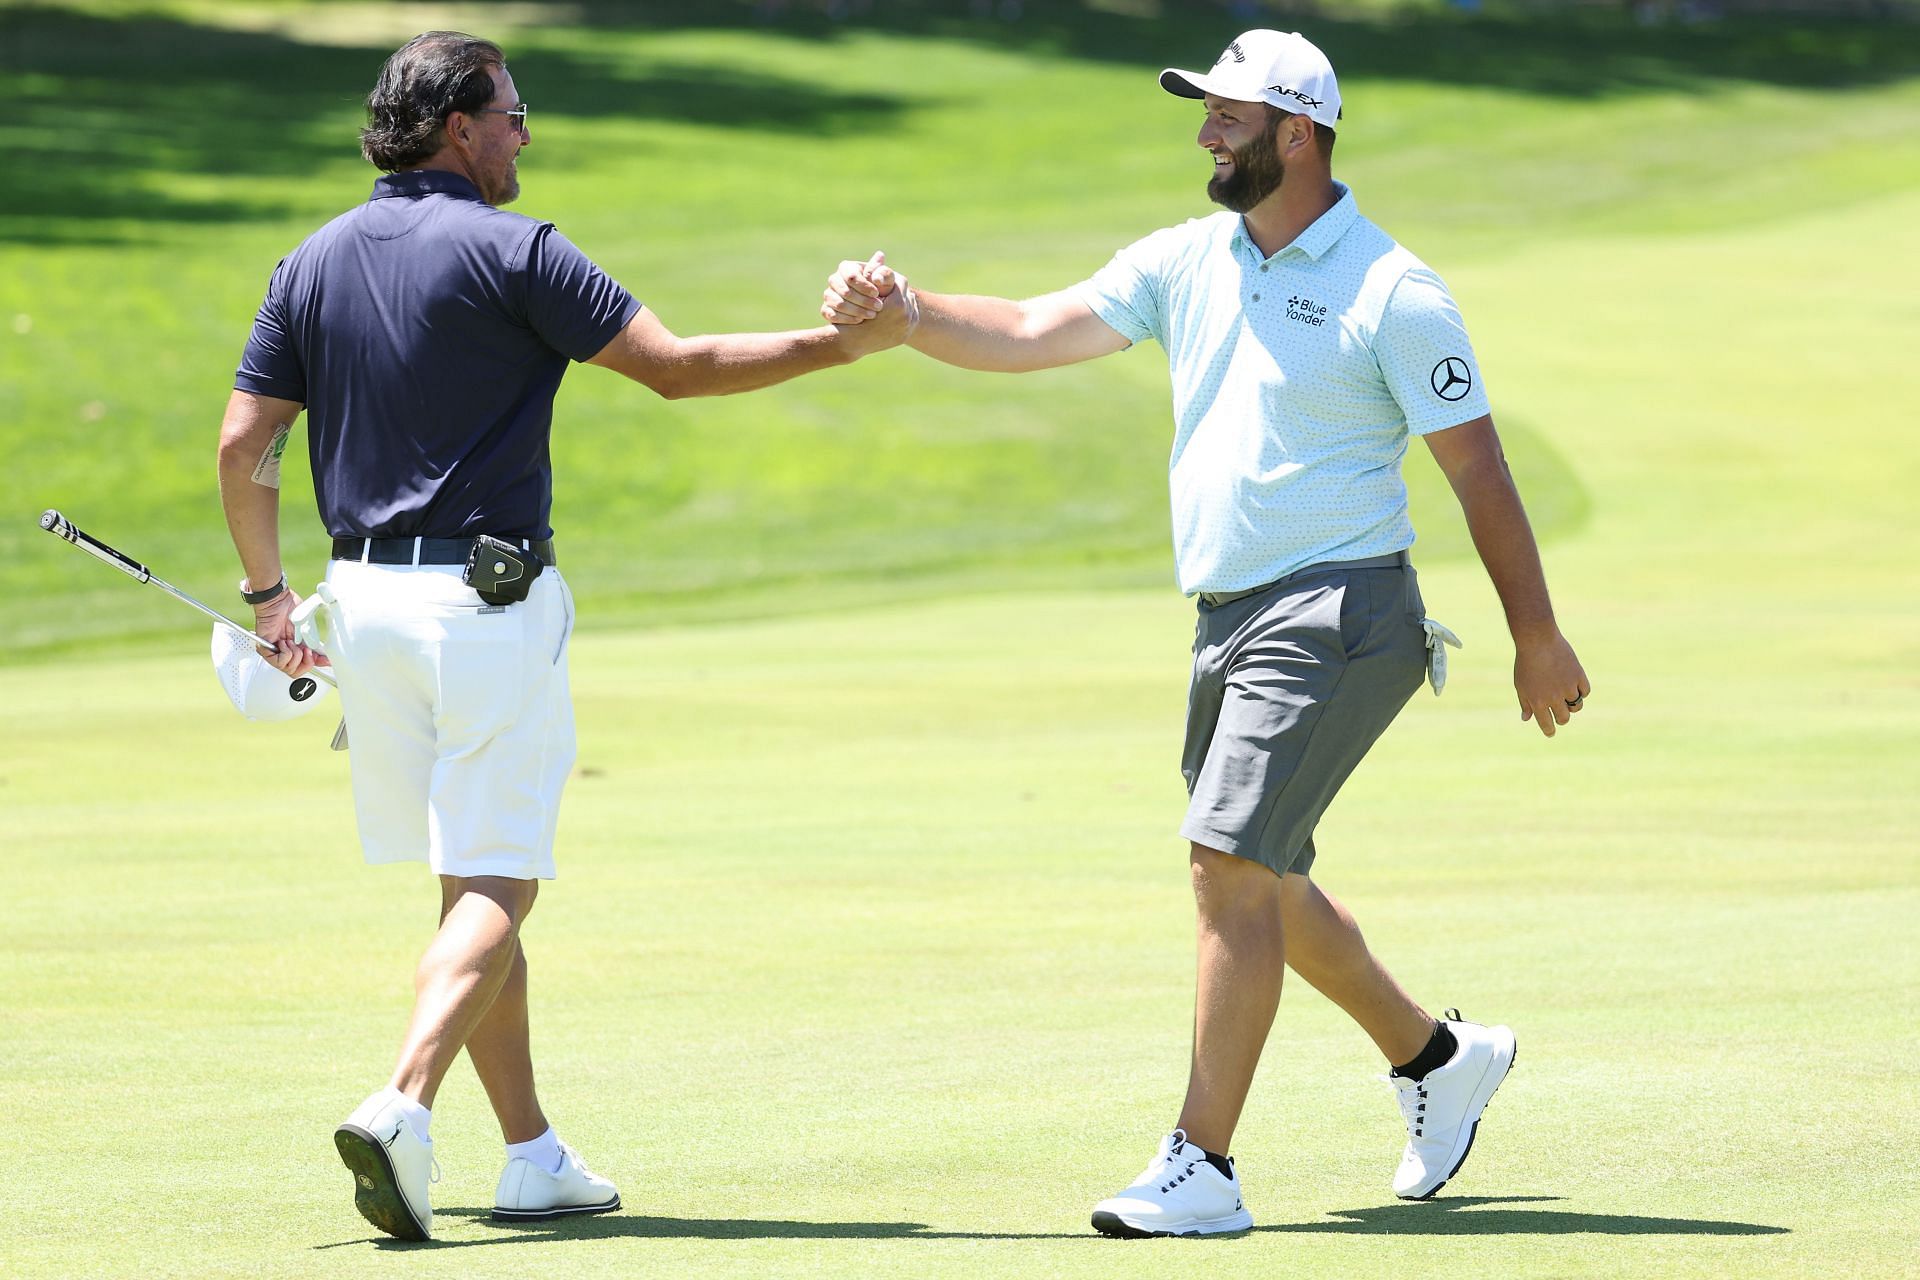 Phil Mickelson and Jon Rahm at the 2022 US Open - Preview (Image via Getty).